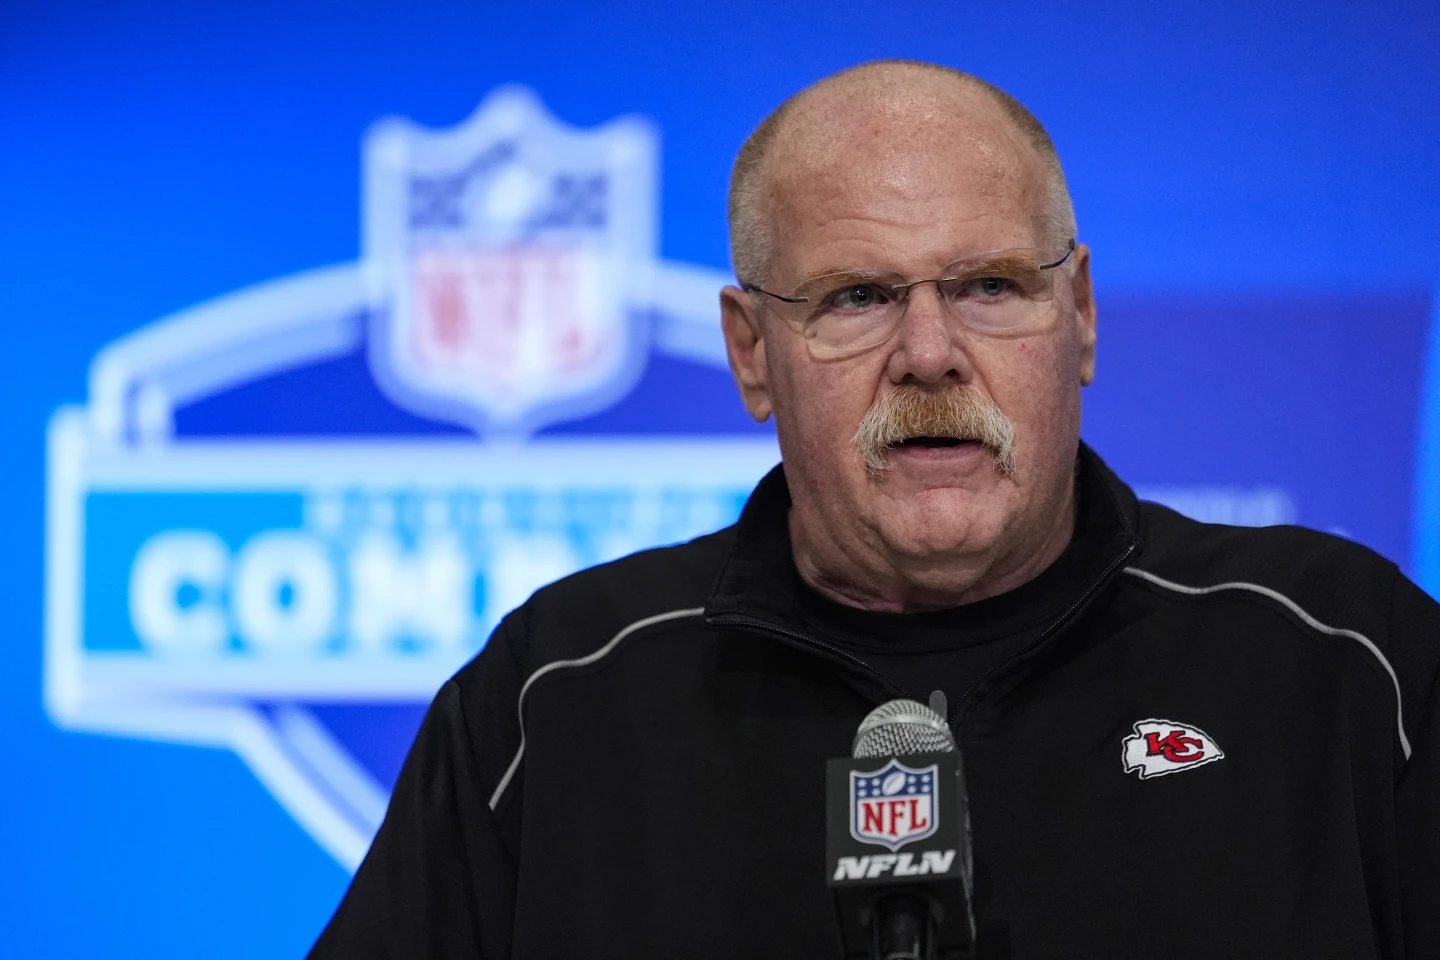 Chiefs coach Andy Reid expresses sorrow over parade shooting, offers hope to avoid future tragedies